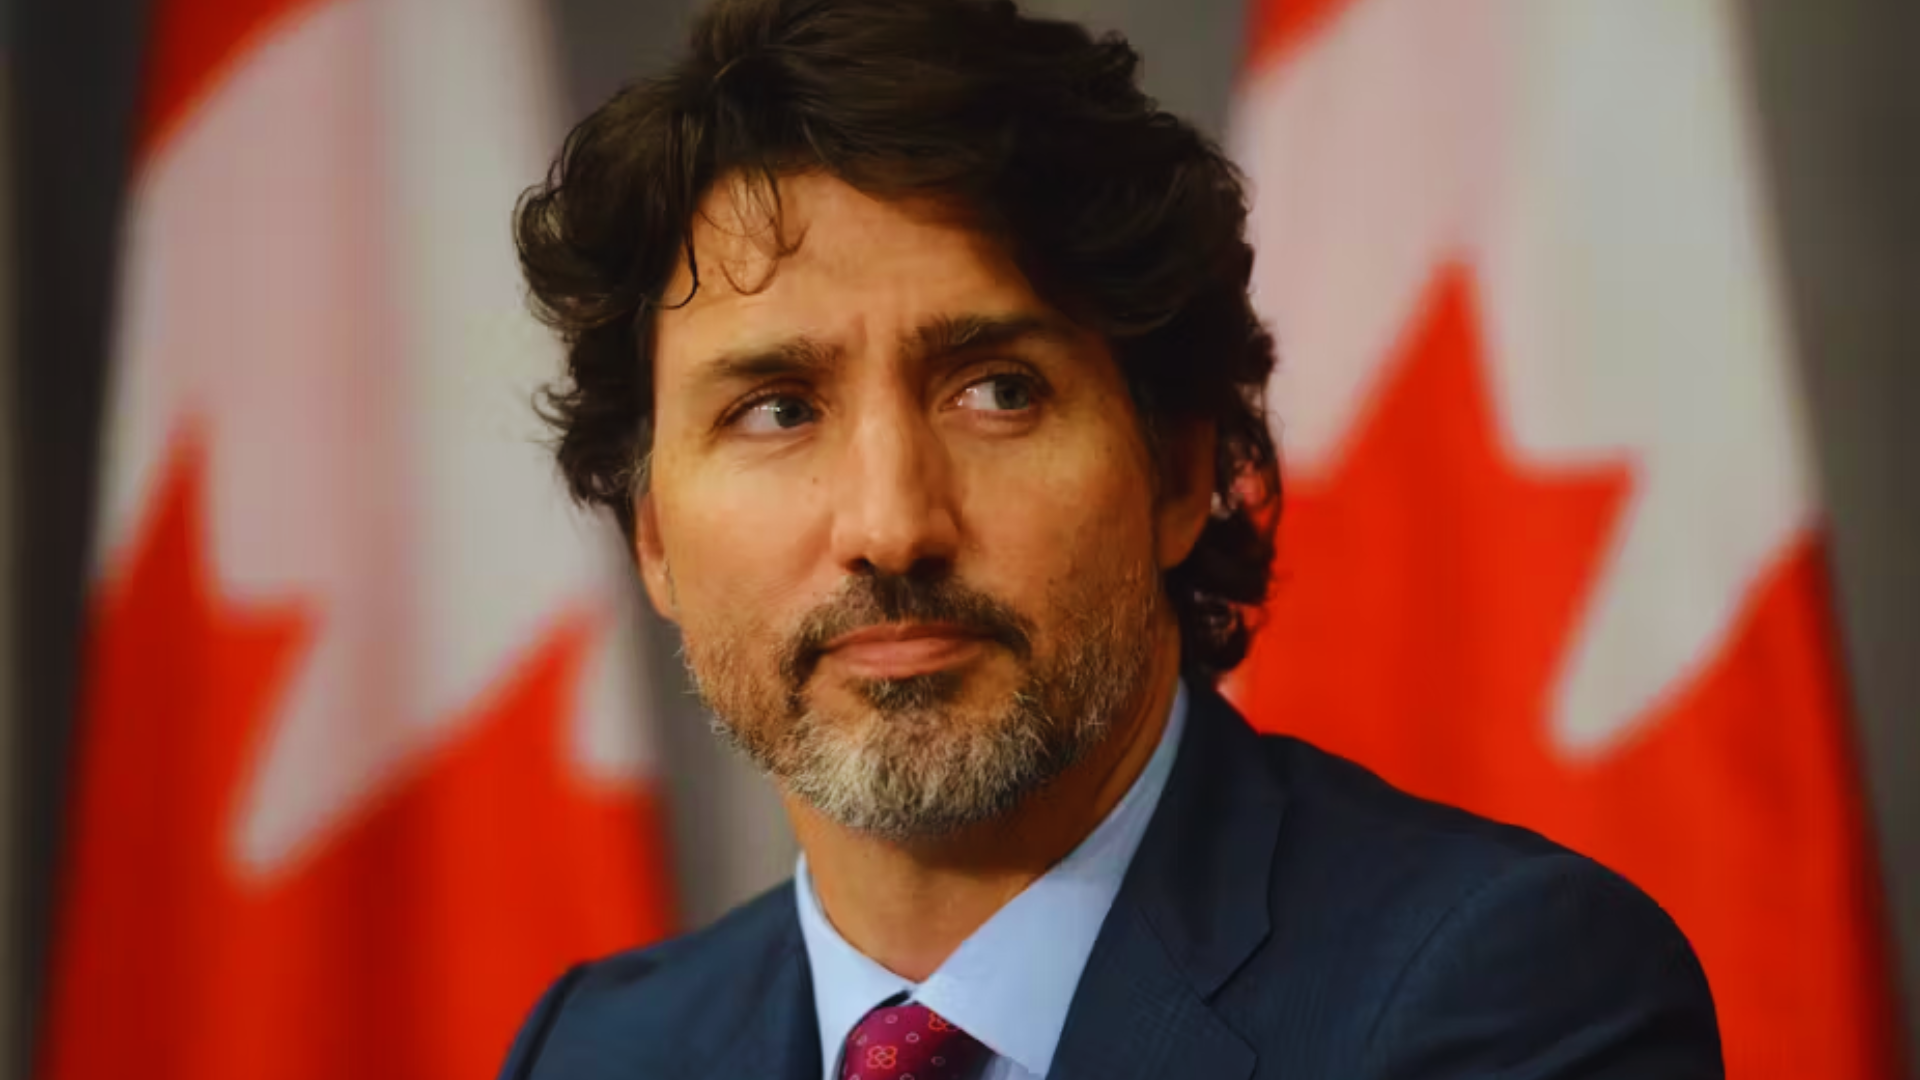 Report: Justin Trudeau’s Plane Wasn’t Allowed To Land In Amritsar In 2018 Until He Agreed To Meet Captain Amarinder Singh